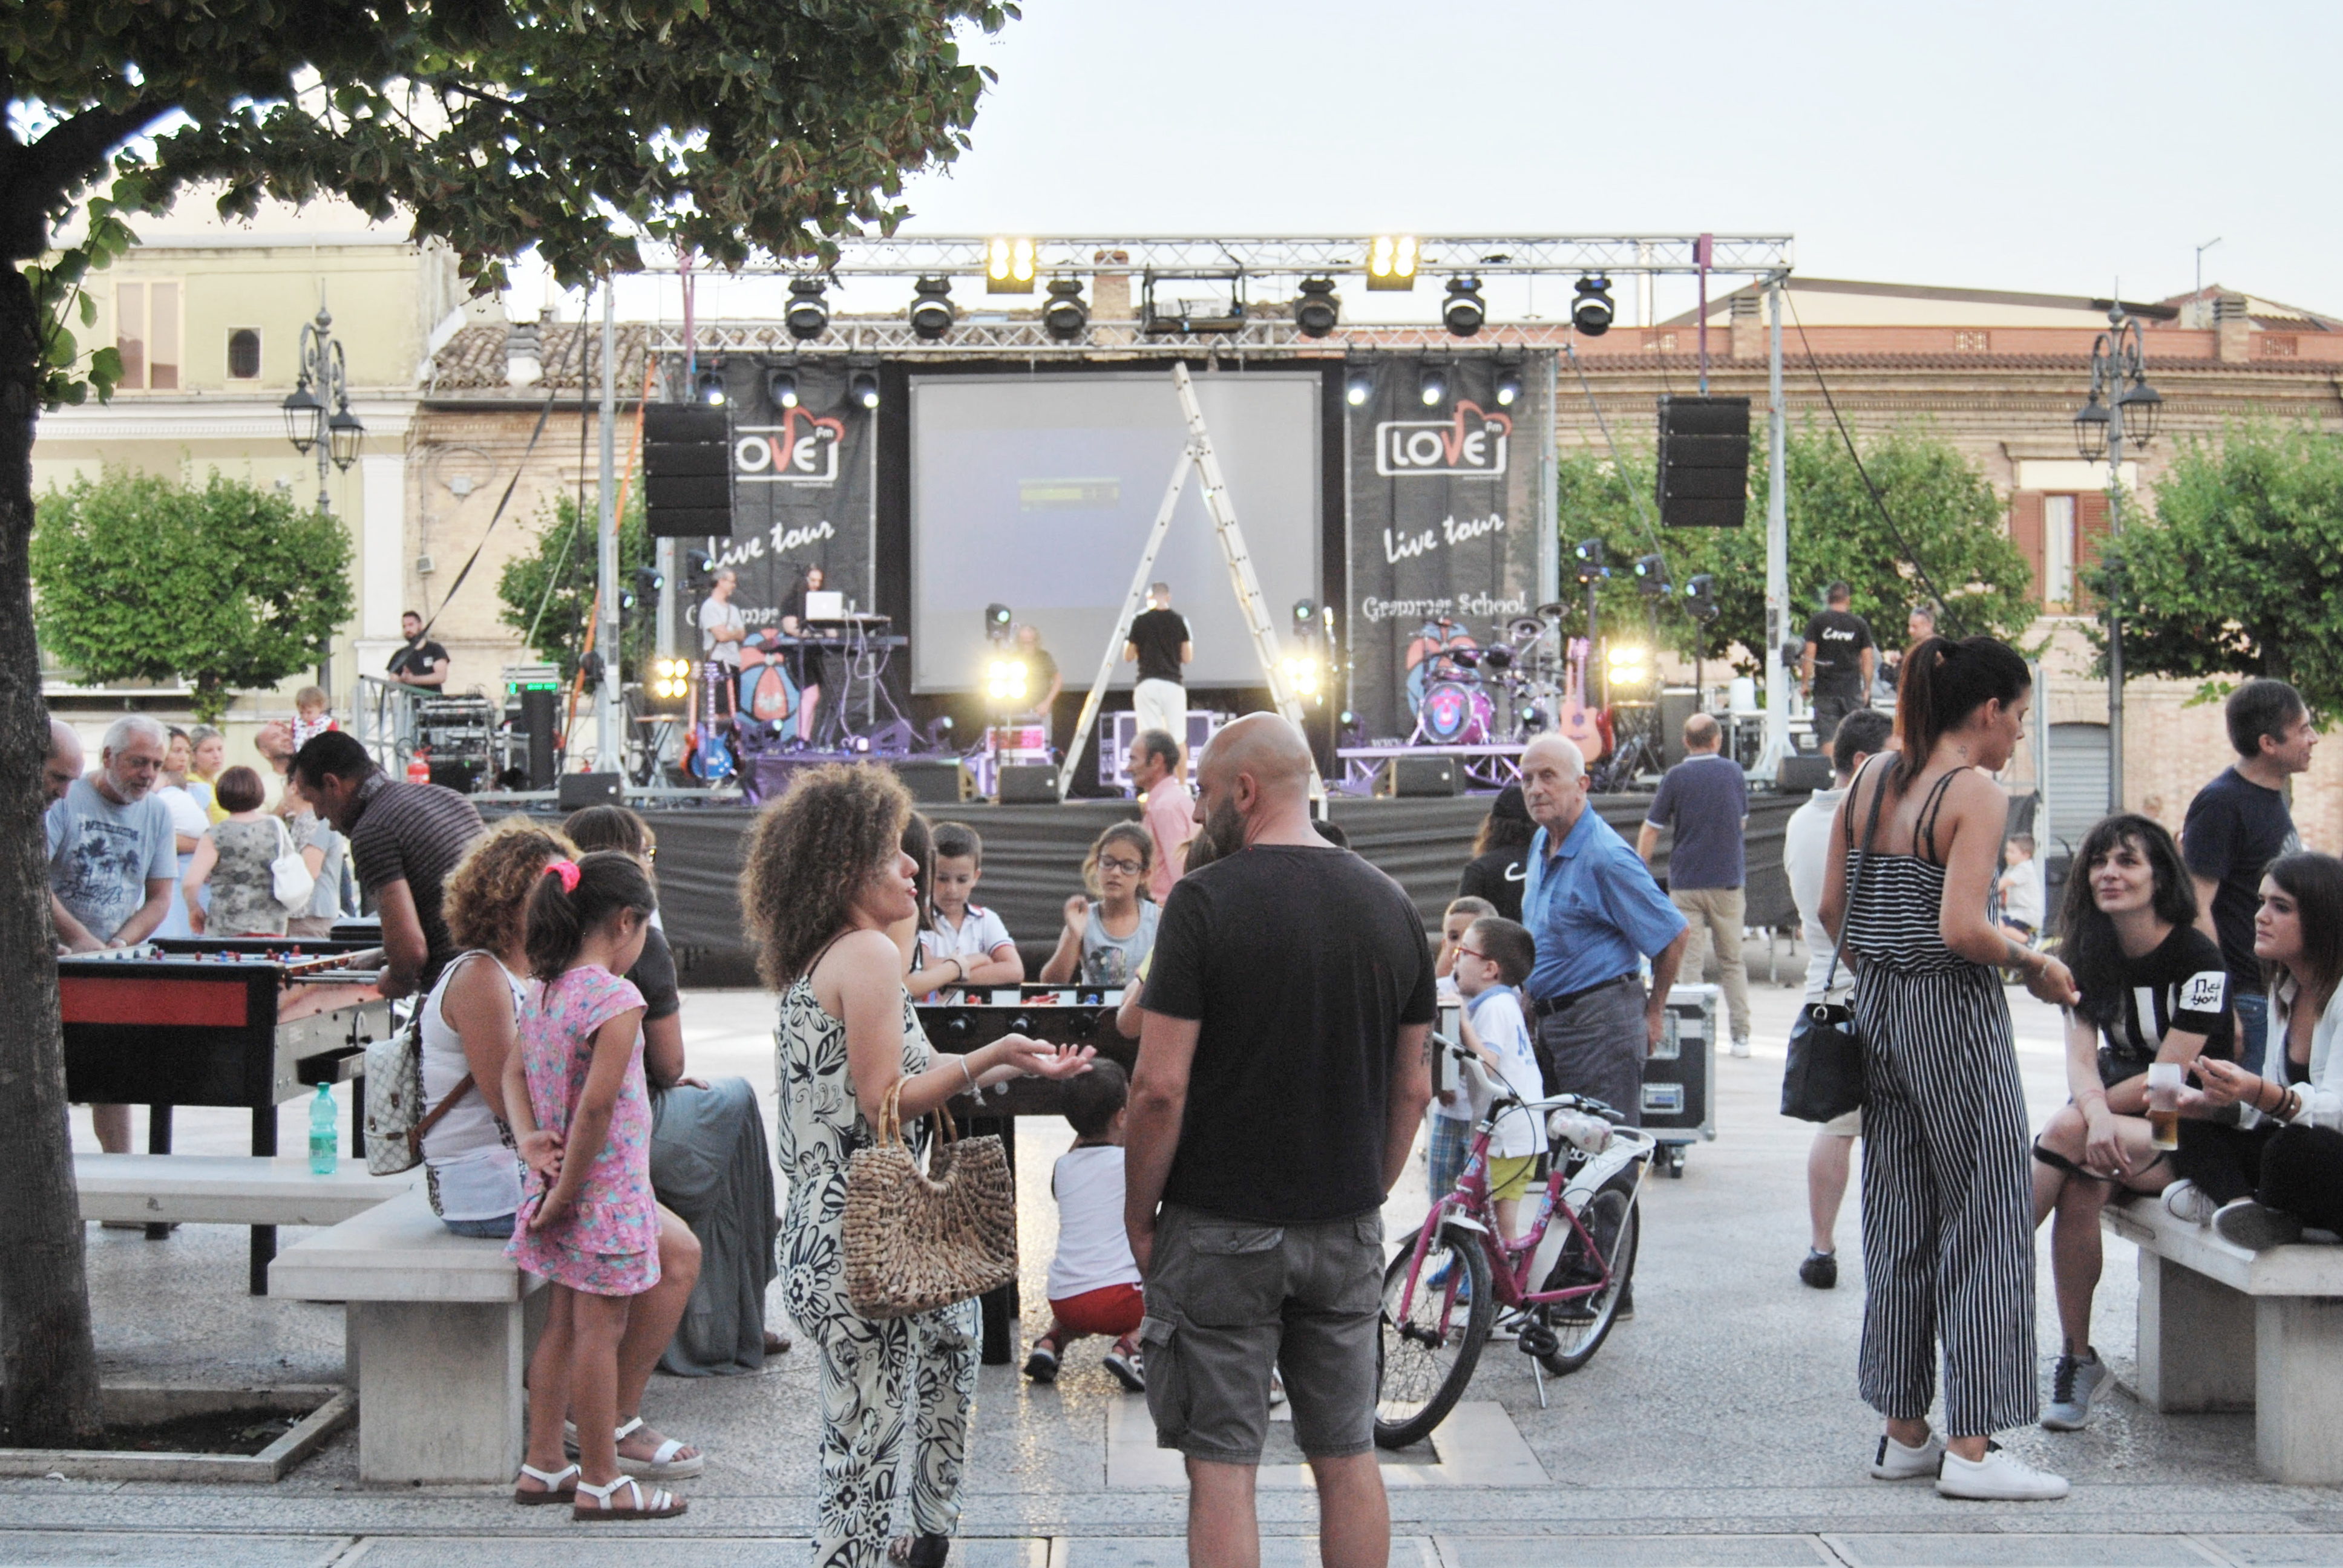 Piazza Matteotti, Biccari, afternoon of 5 August 2019; preparation for the final concert of S. Donato. ©Valeria Volpe